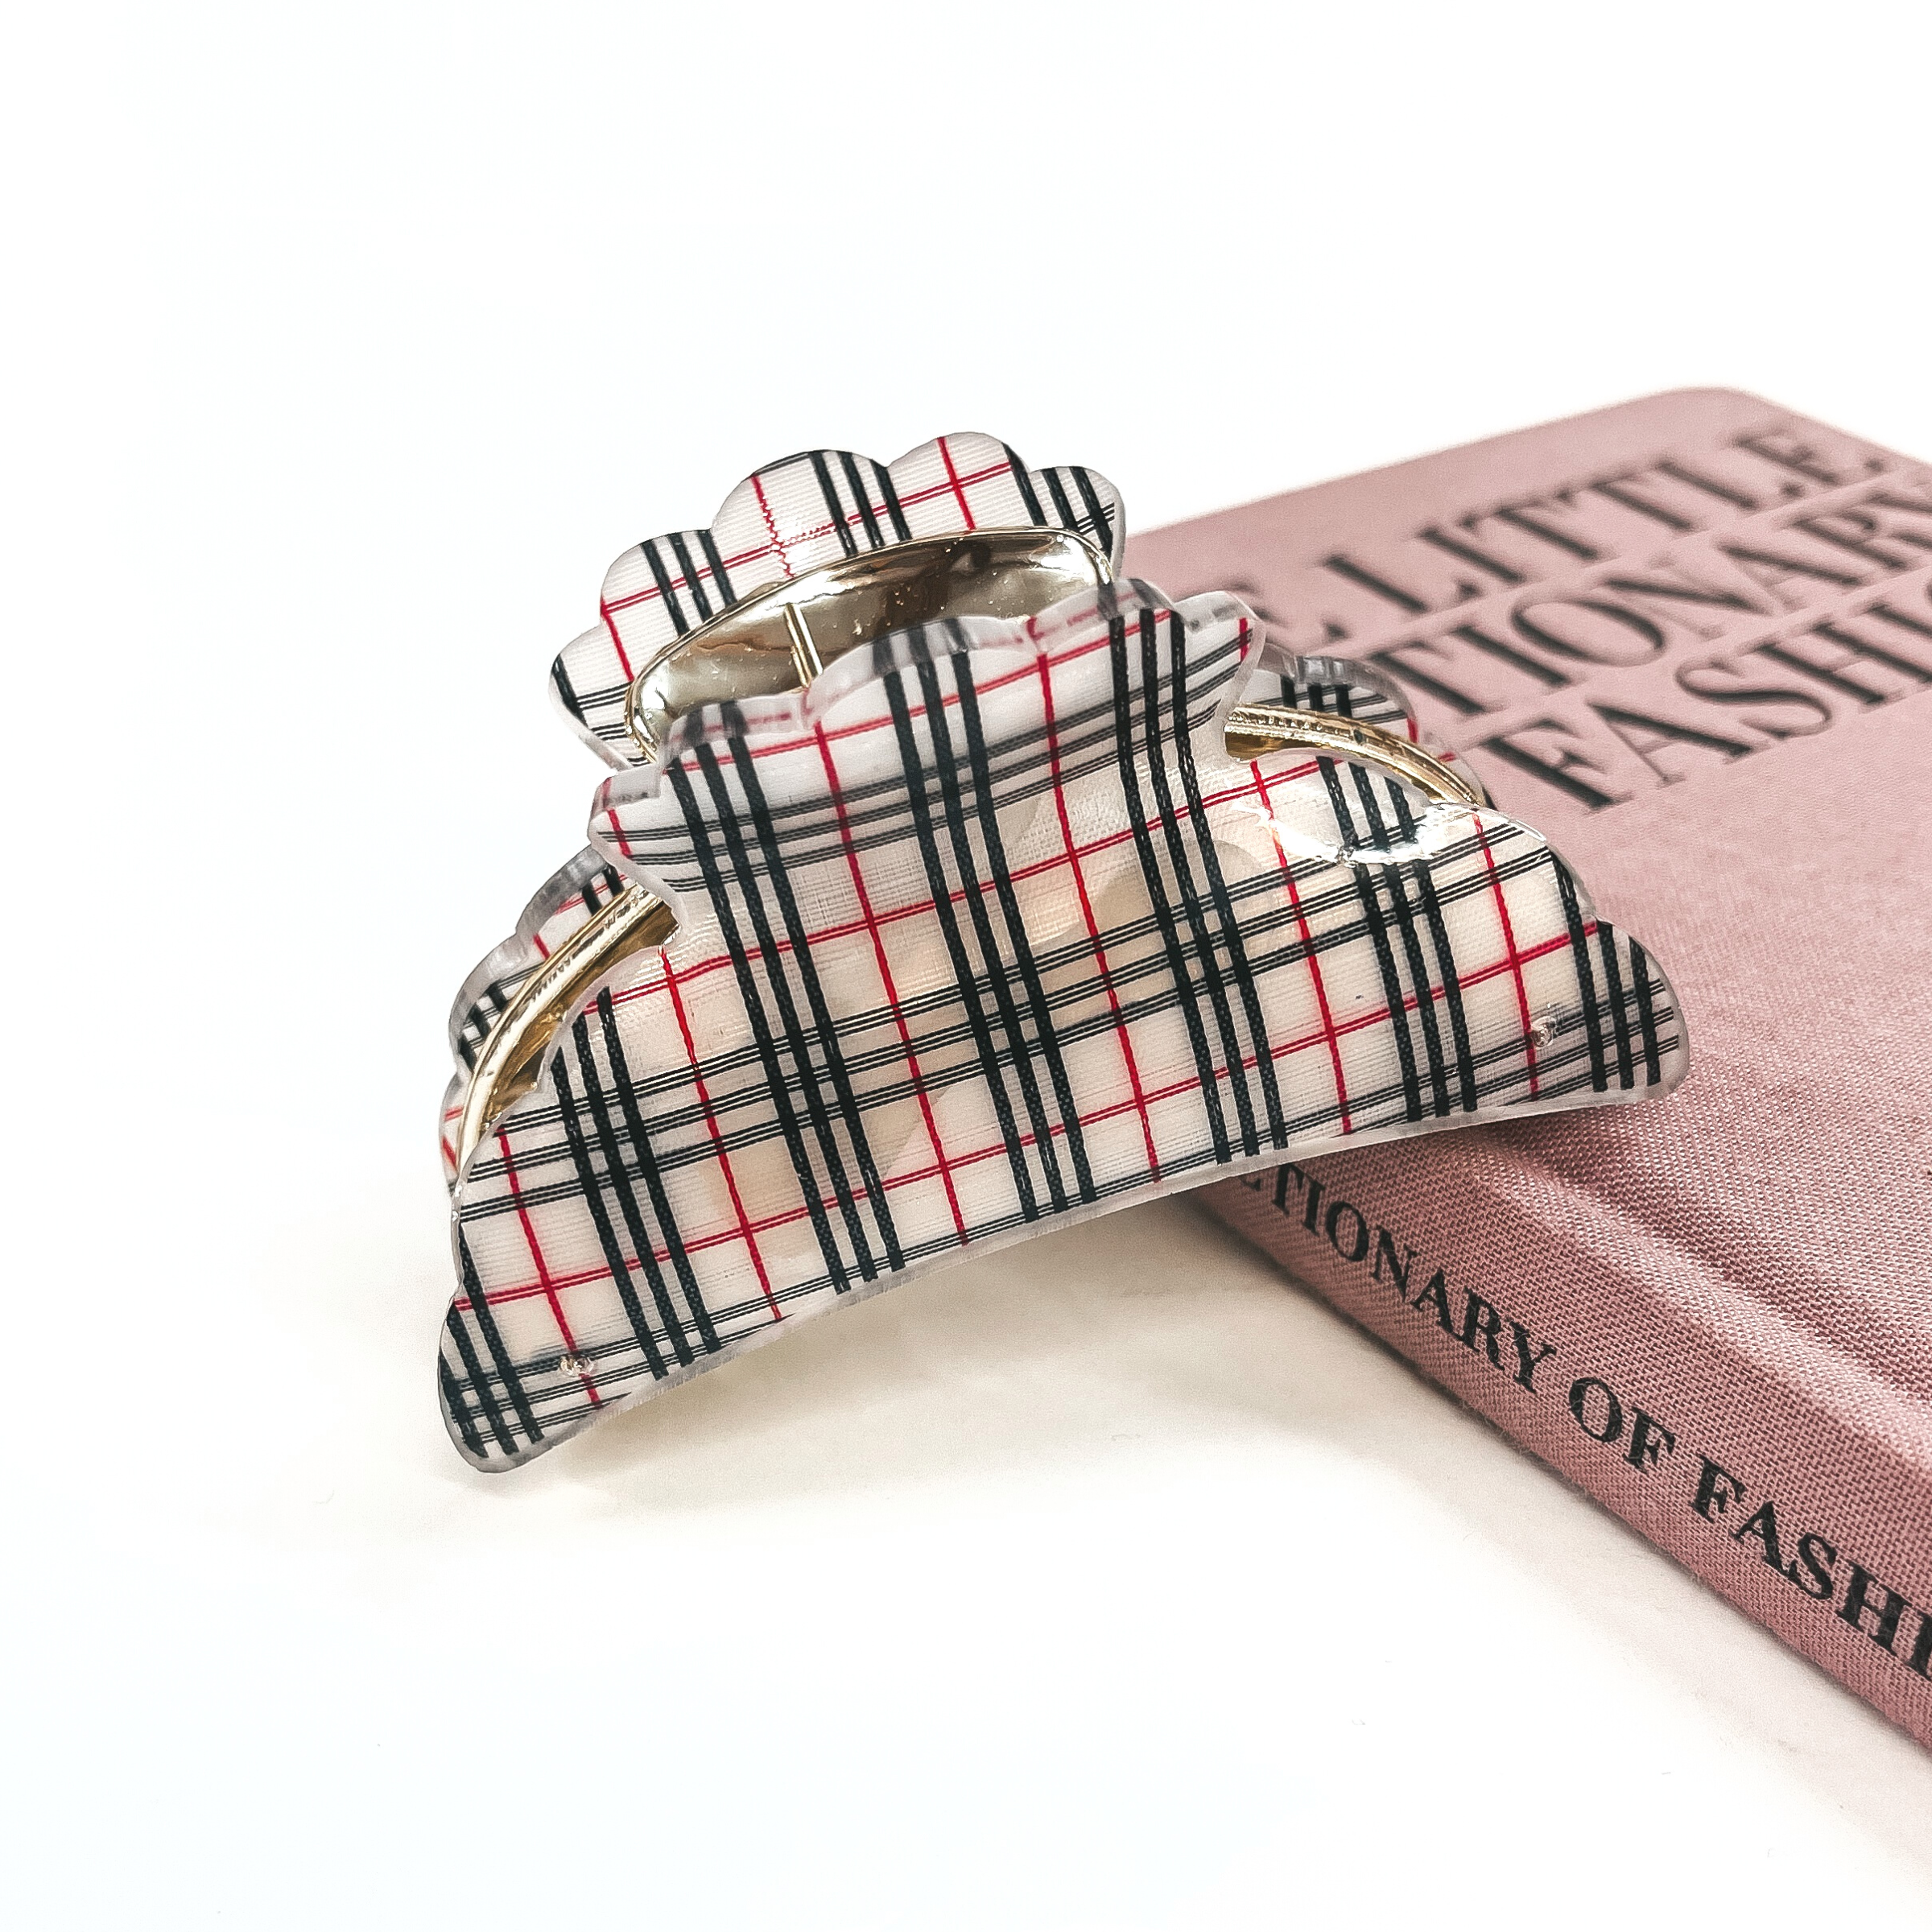 This is a gold and white plaid print hair clip laying on the side of a pink book and white background.